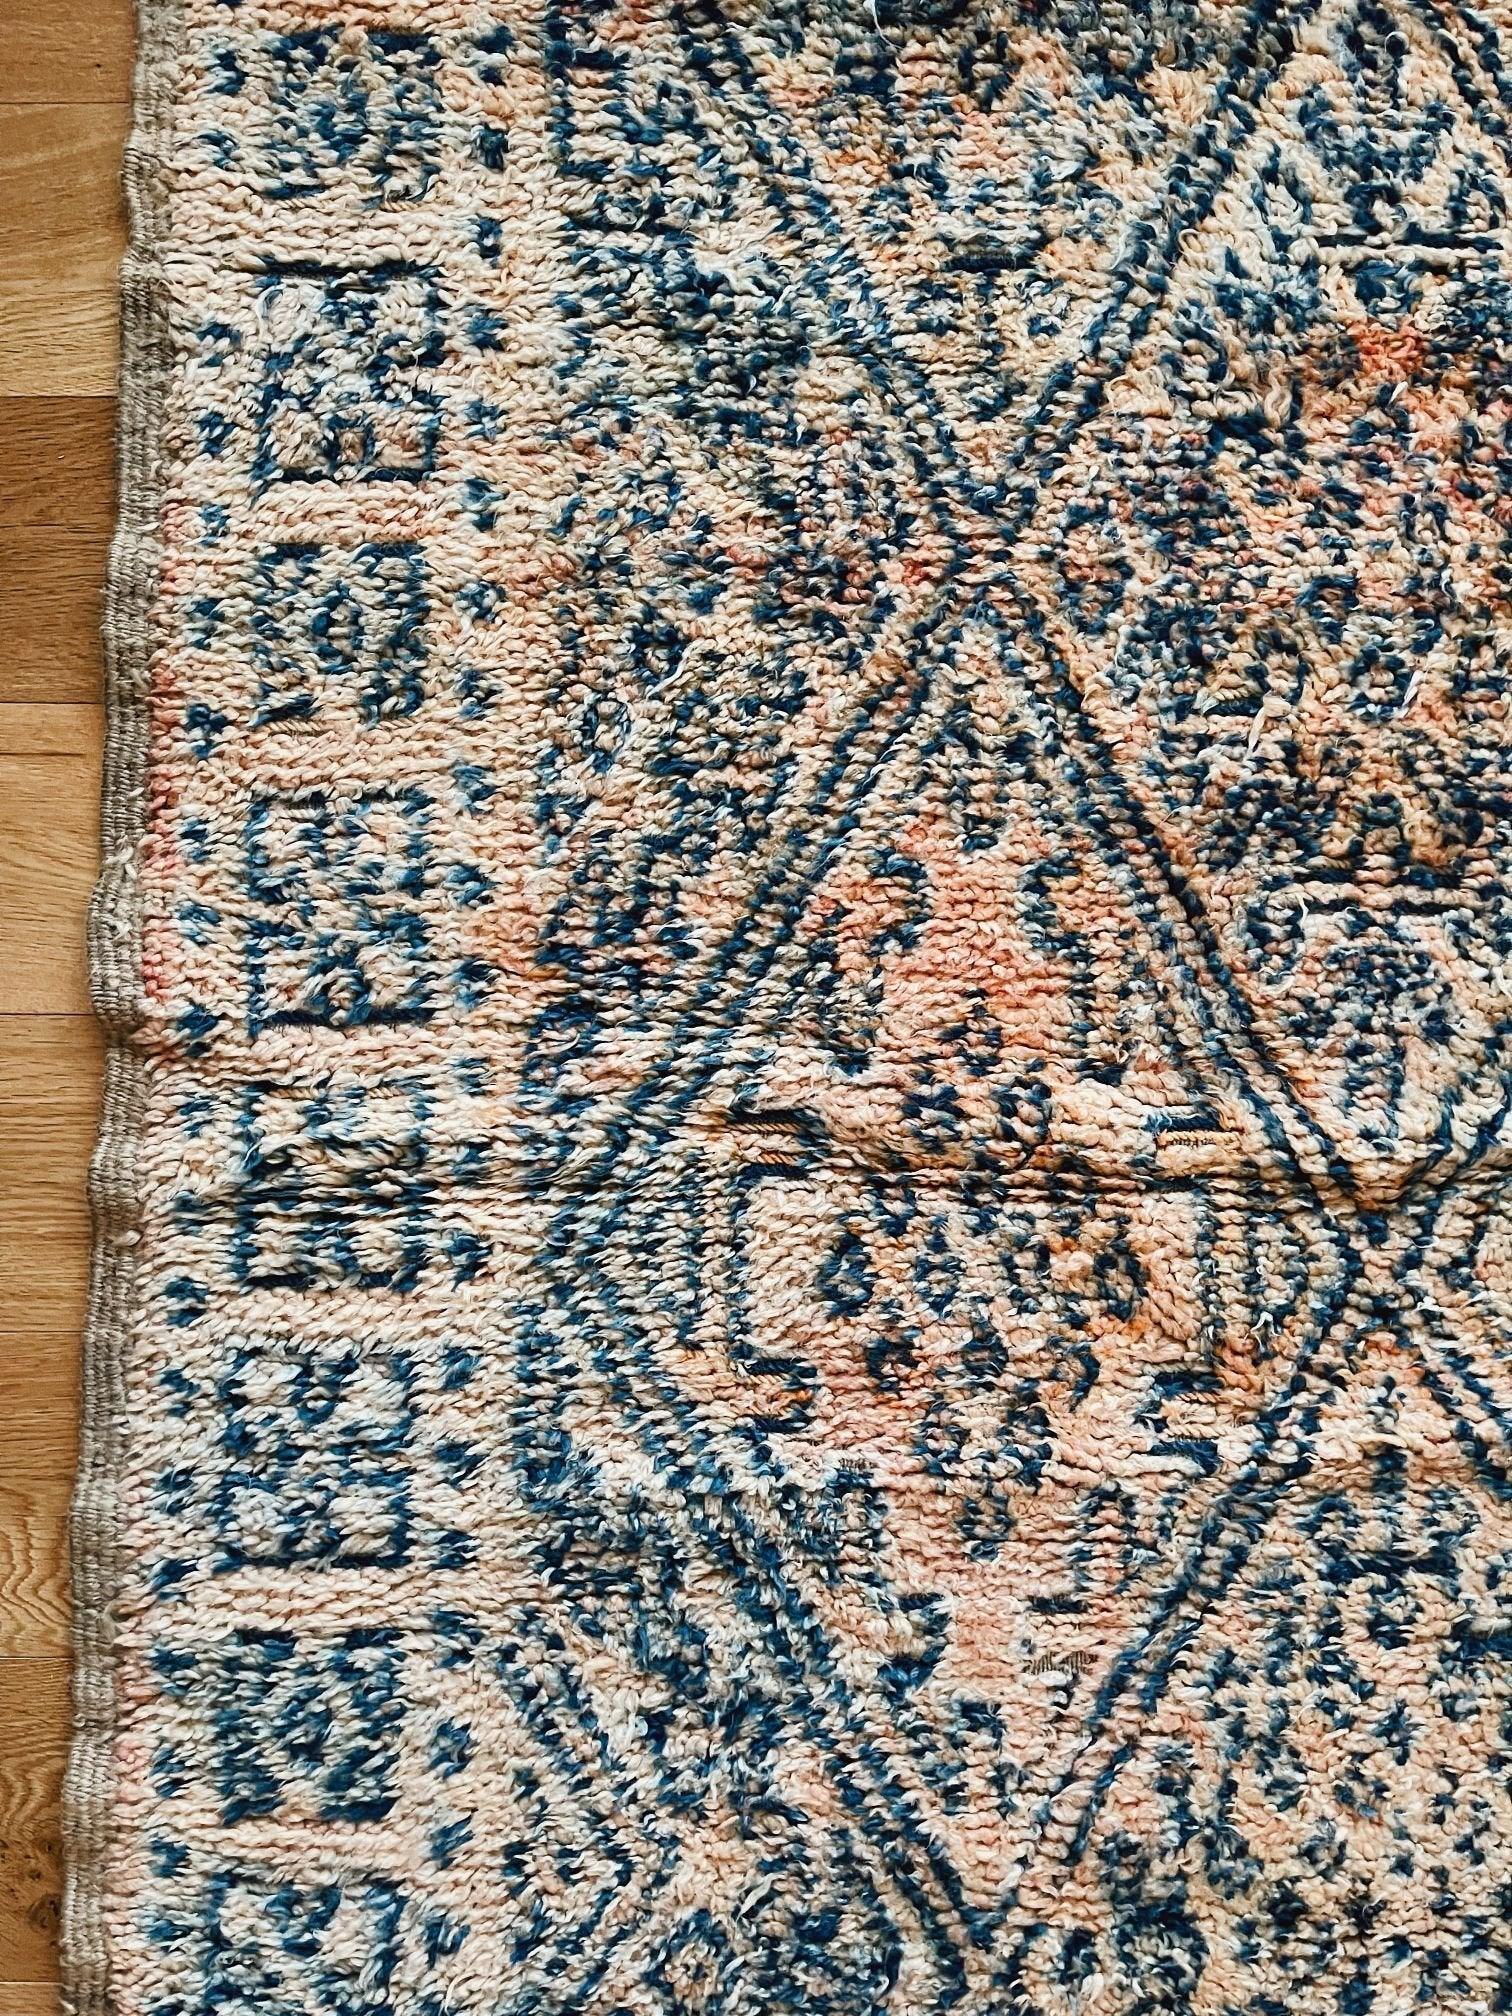 Anjana Faded Peach Iris One of A Kind Moroccan Rug - Lustere Living